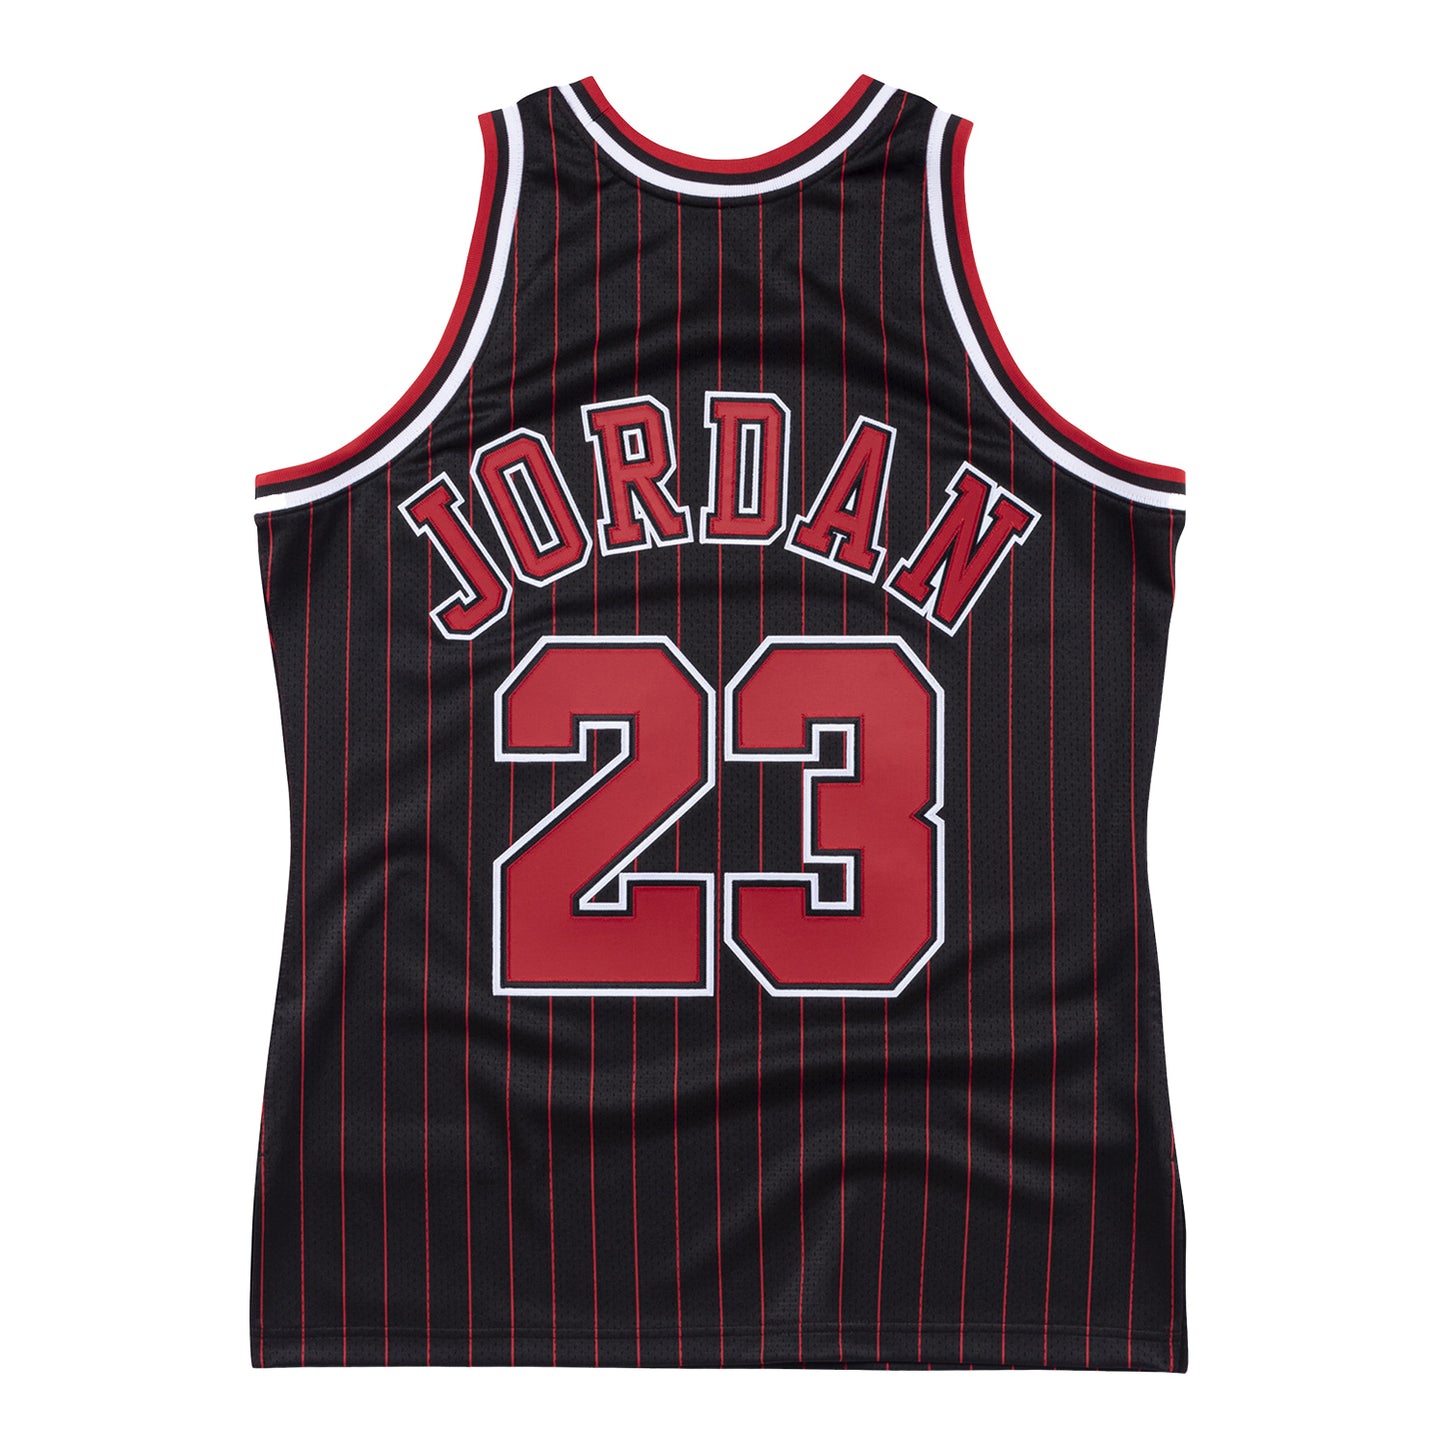 Shop Dennis Rodman Jersey Black Bulls with great discounts and